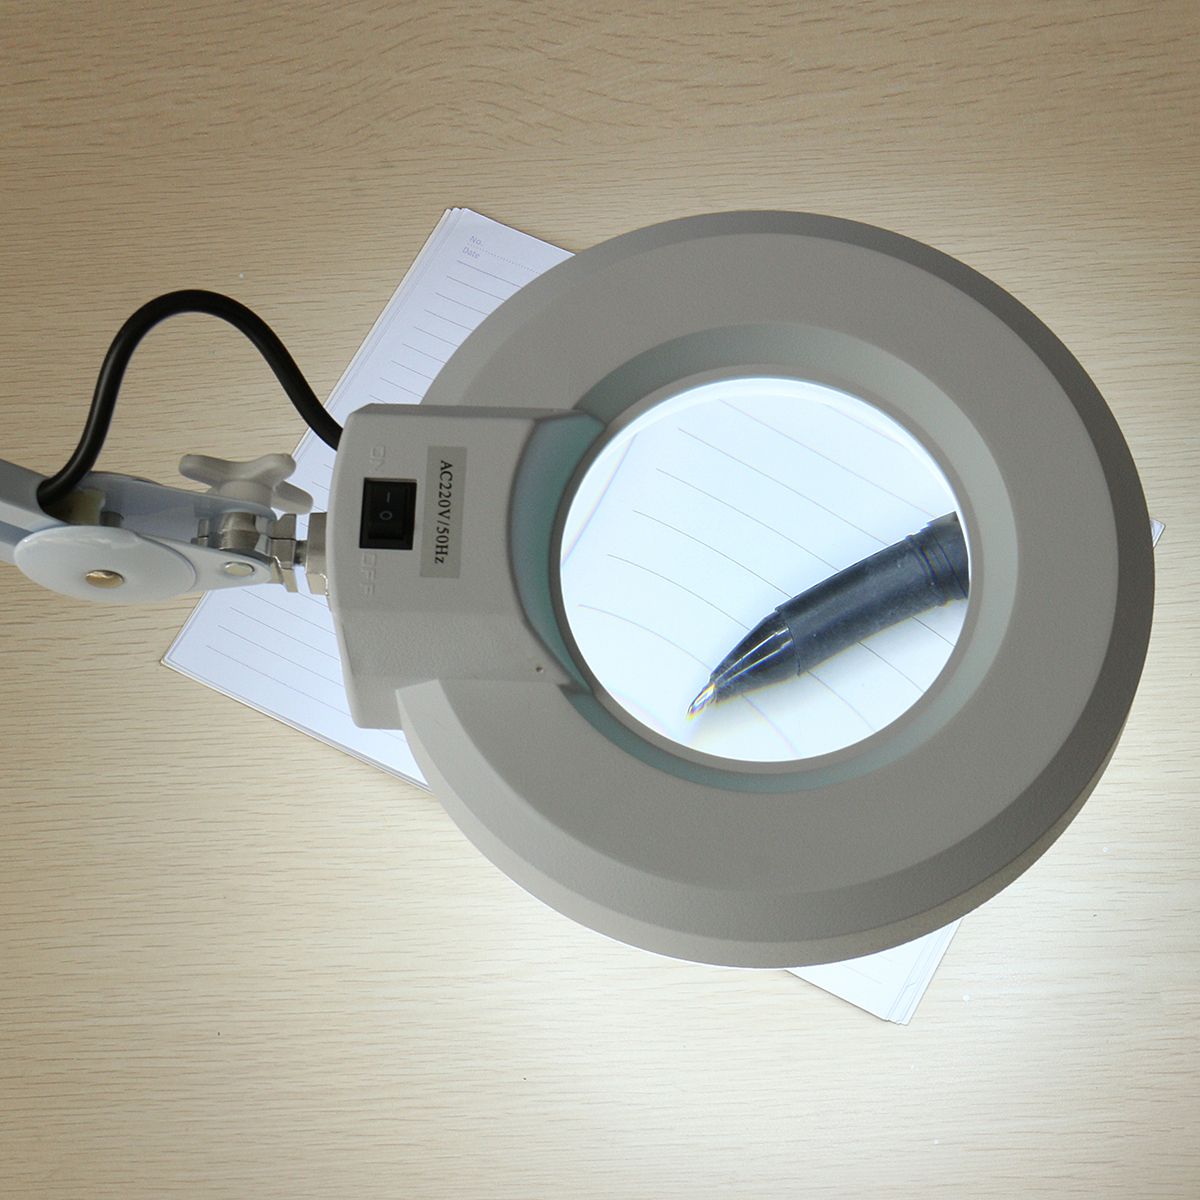 5X127mm-Magnifying-Lamp-LED-5-Inch-SMD-Diopter-Magnifier-Desk-Table-Light-White-1400034